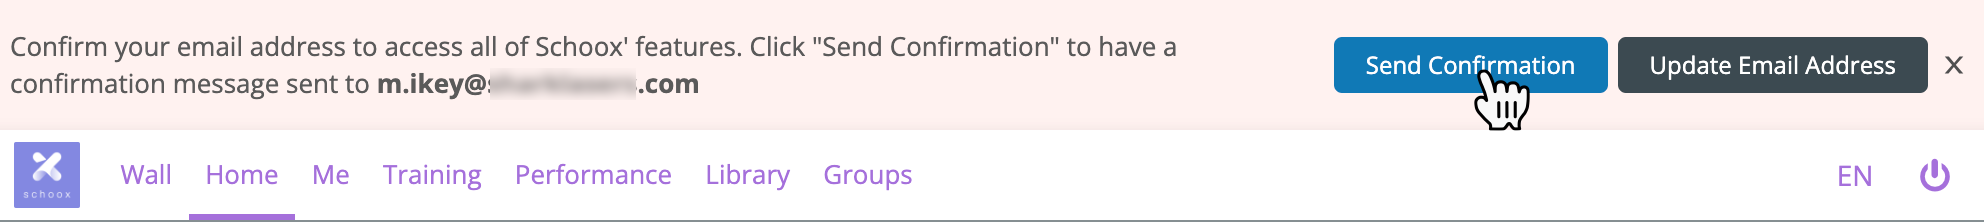 Confirm_Email-01.png